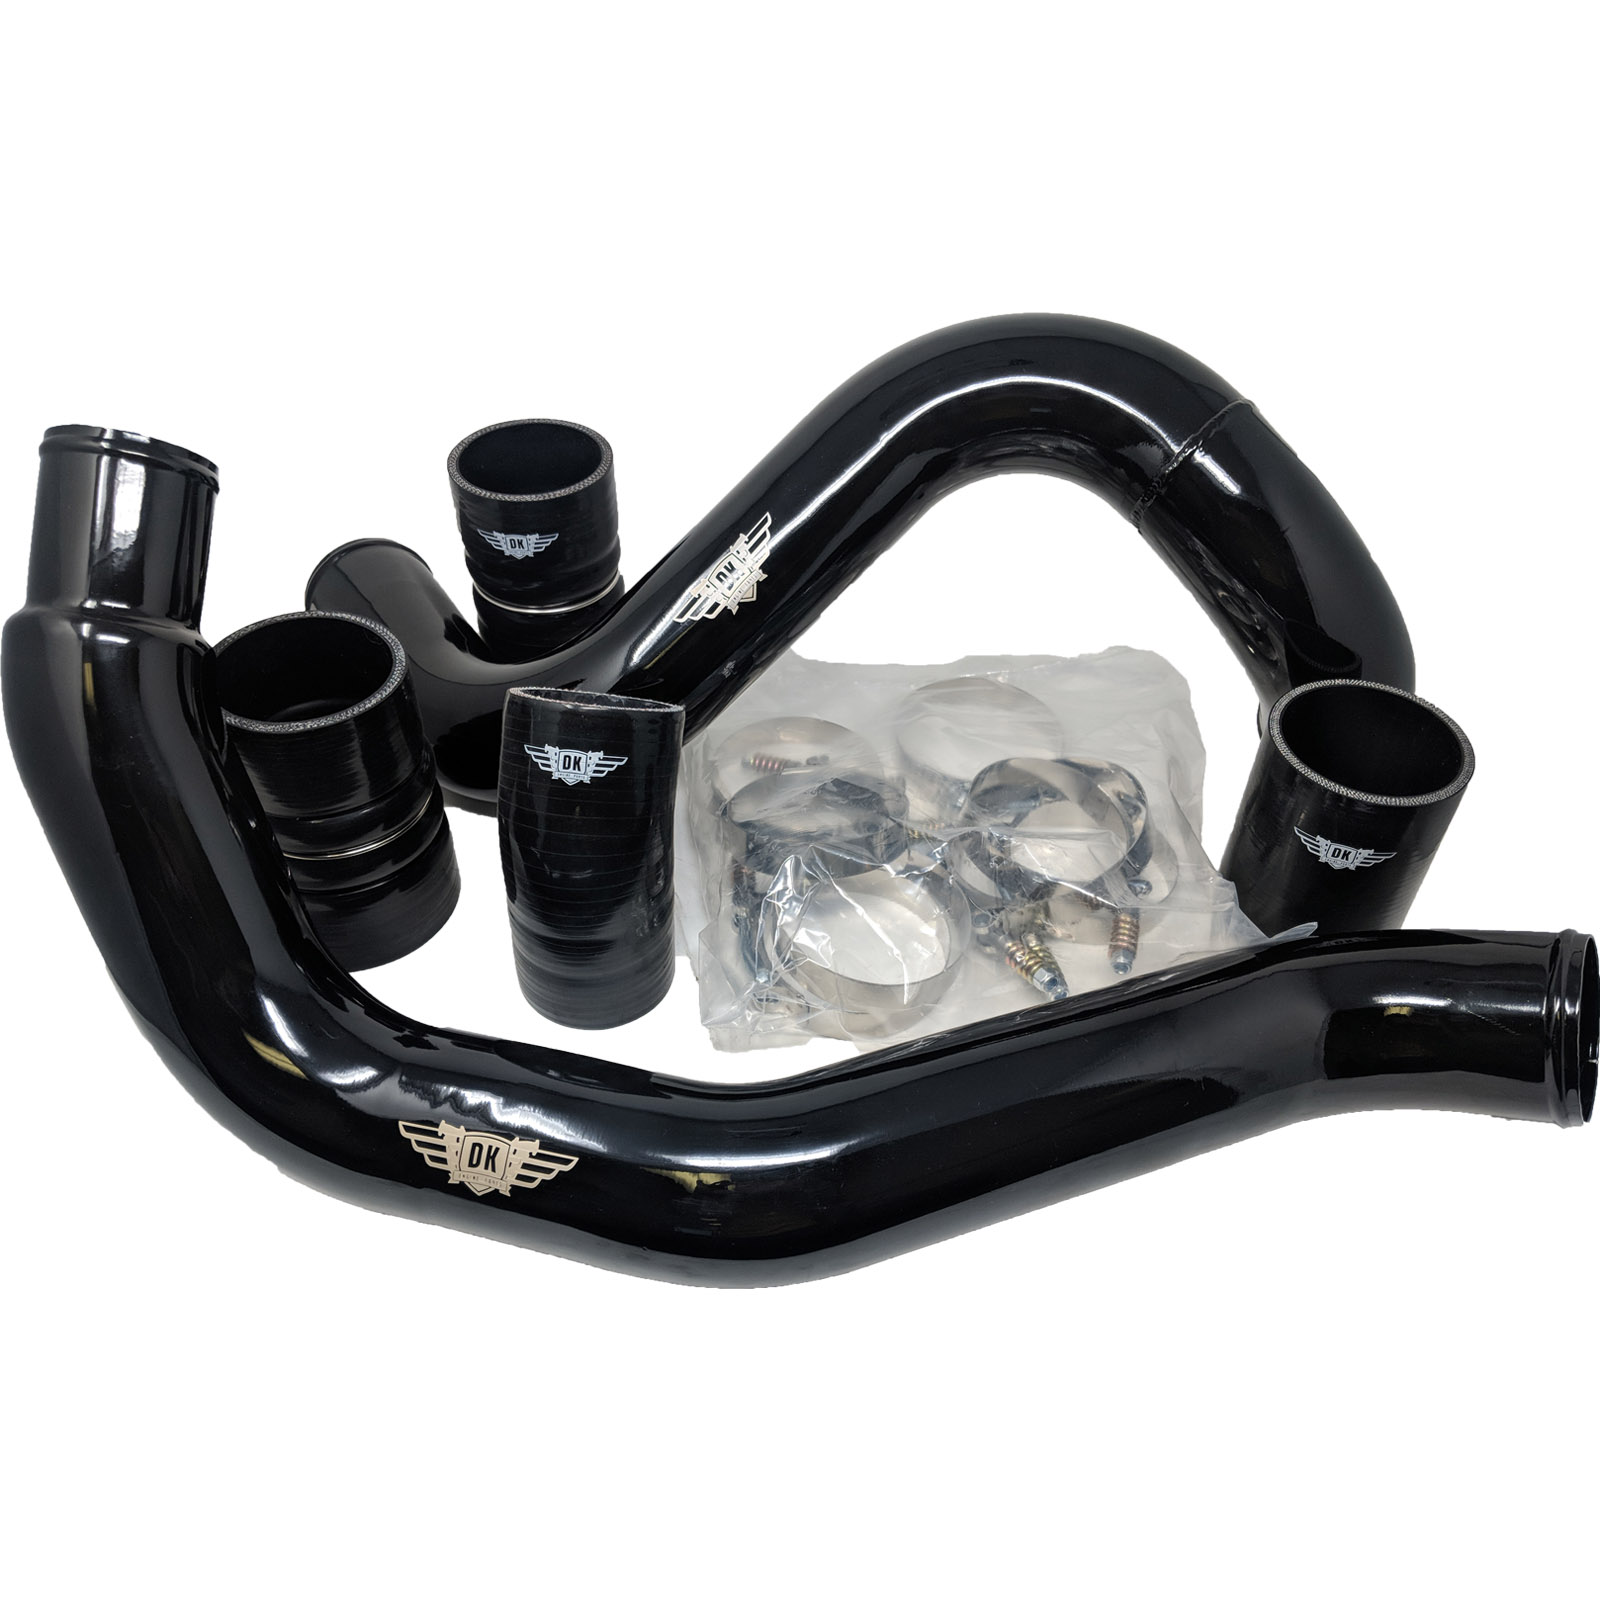 Black Intercooler Pipe Kit & Intake Elbow Repalcement for 2003-2007 Ford 6.0L Powerstroke 